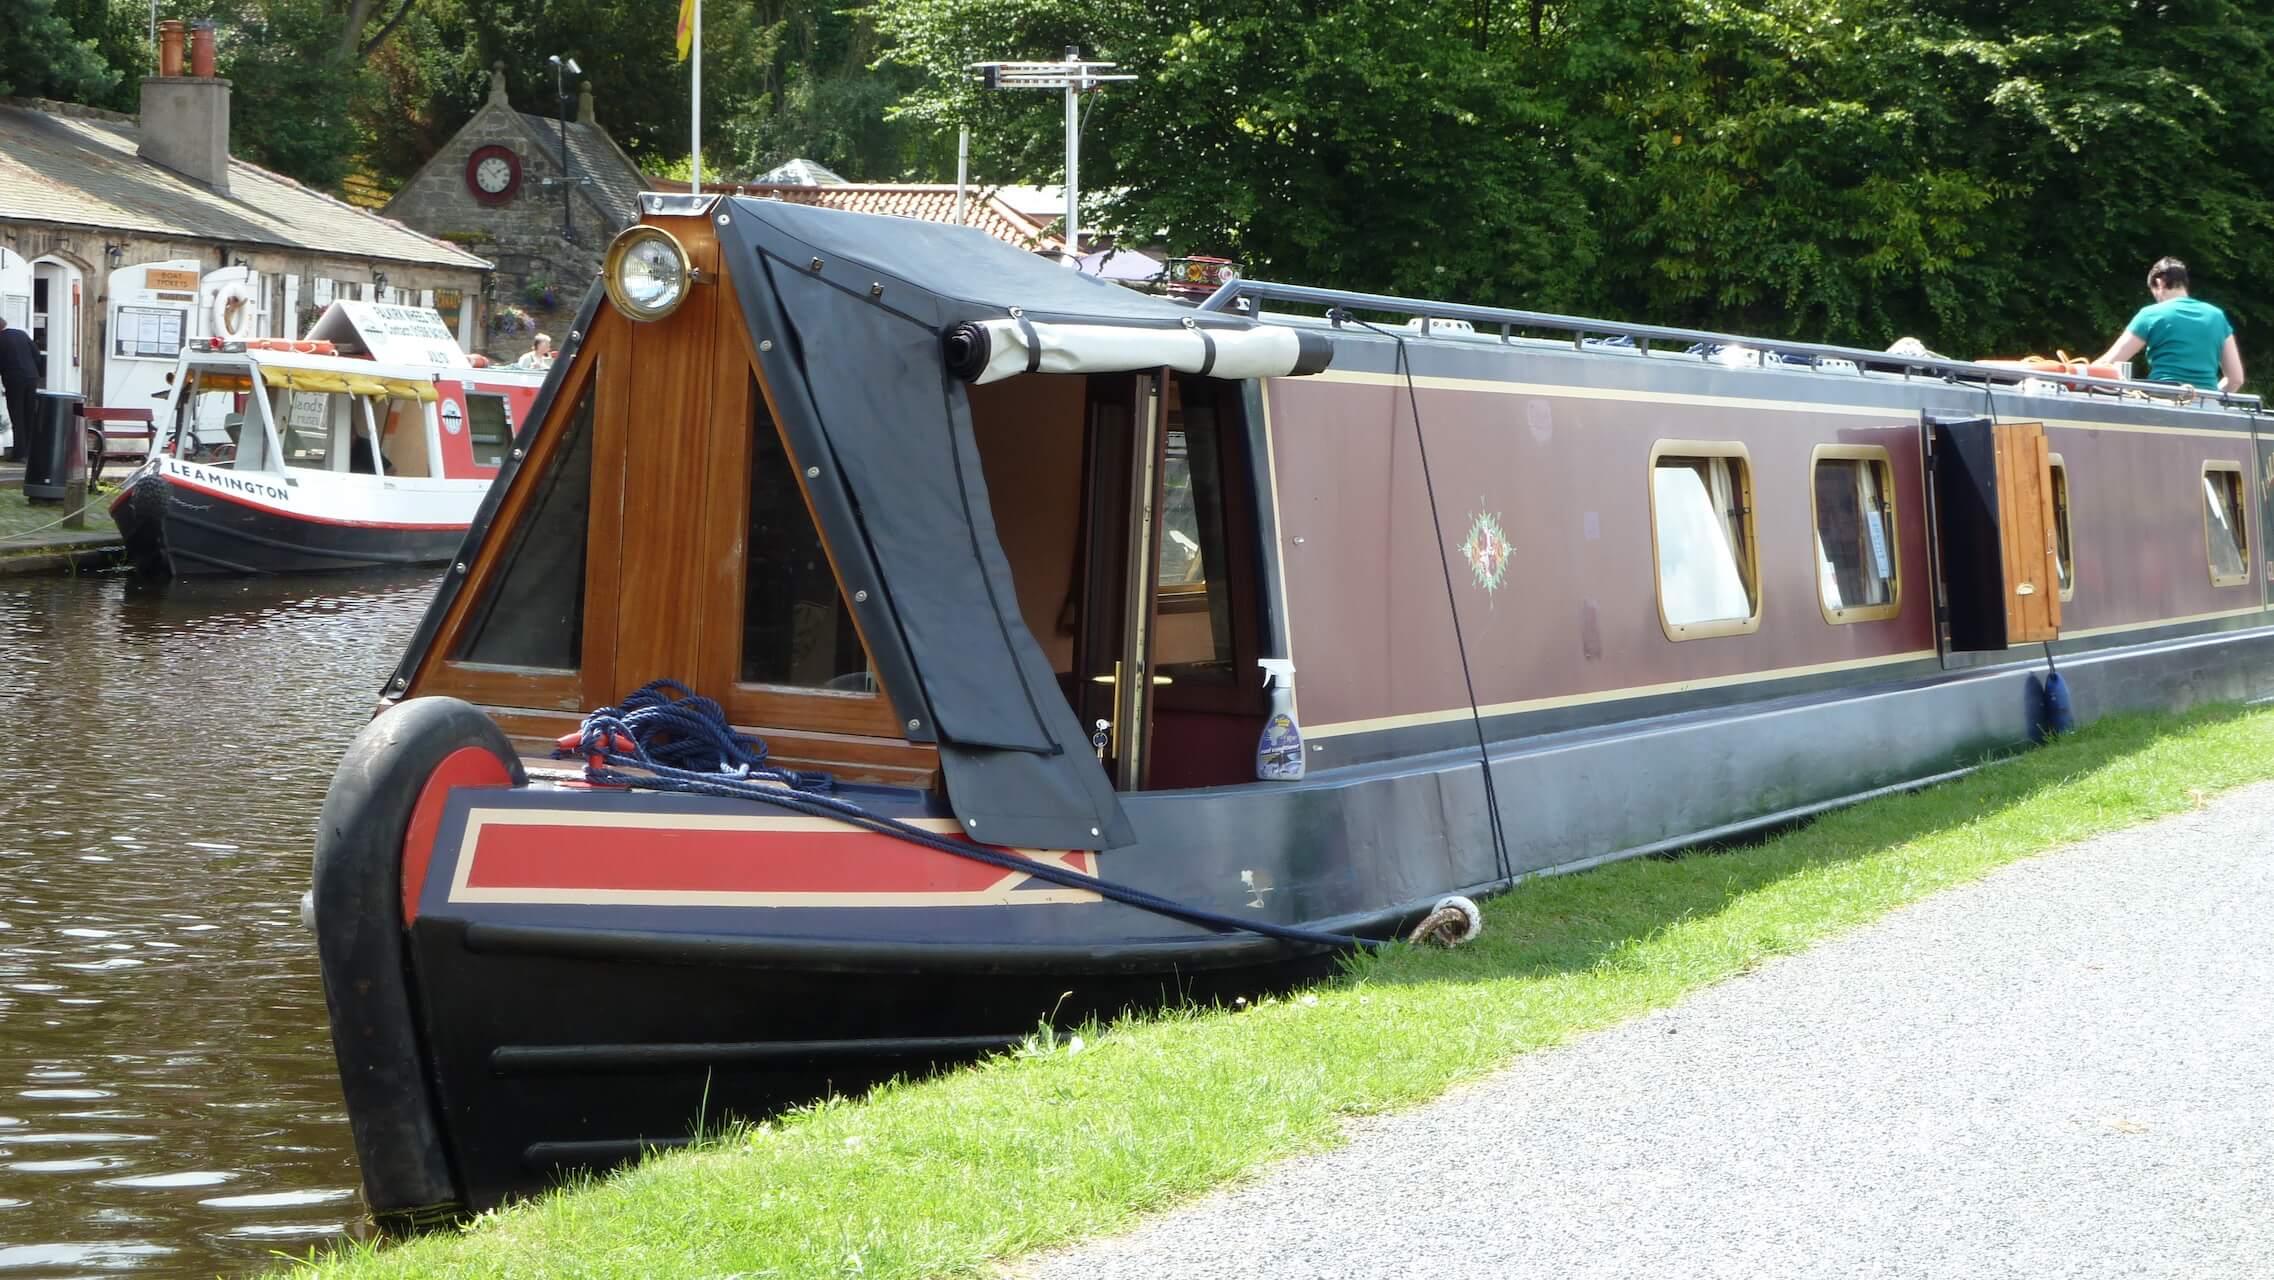 Narrowboat in Linlithgow